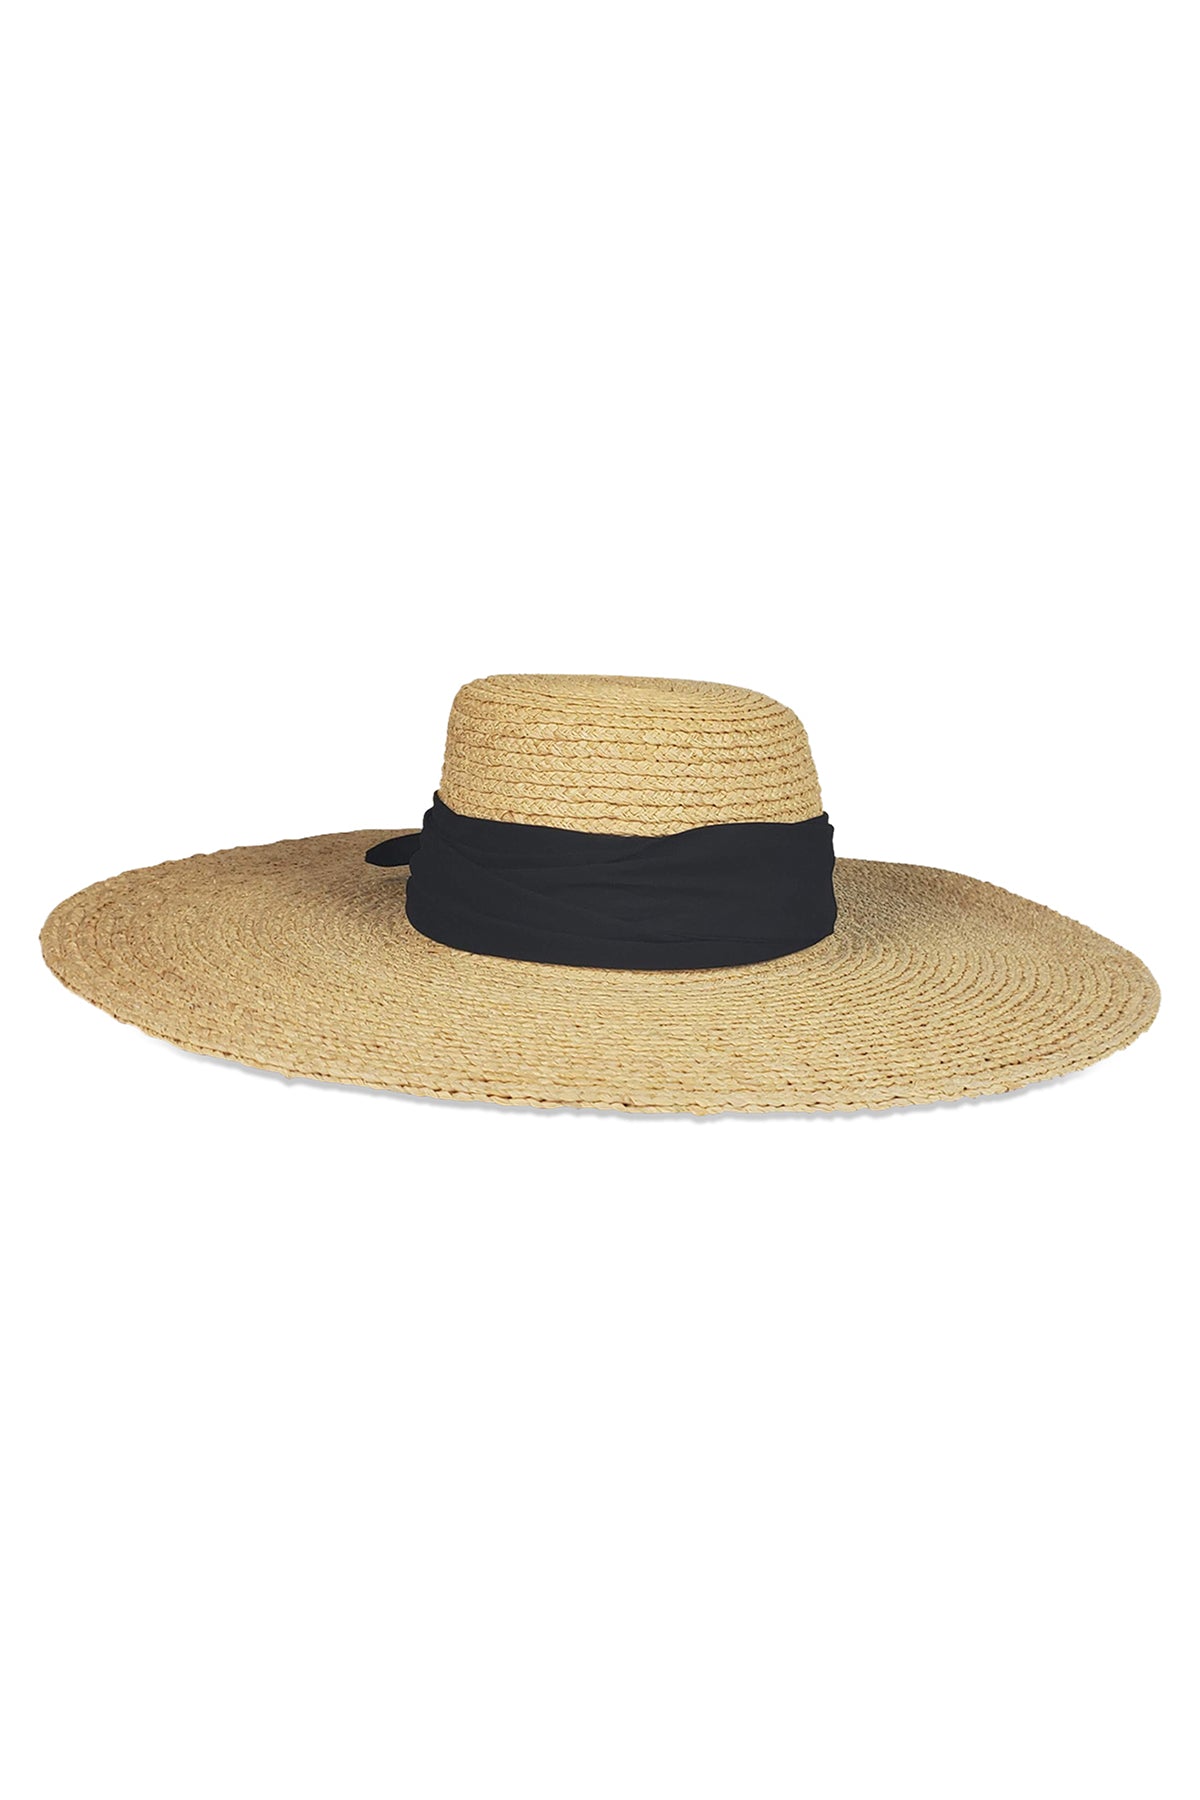 Coco Sunhat Natural with Black-17958542835905